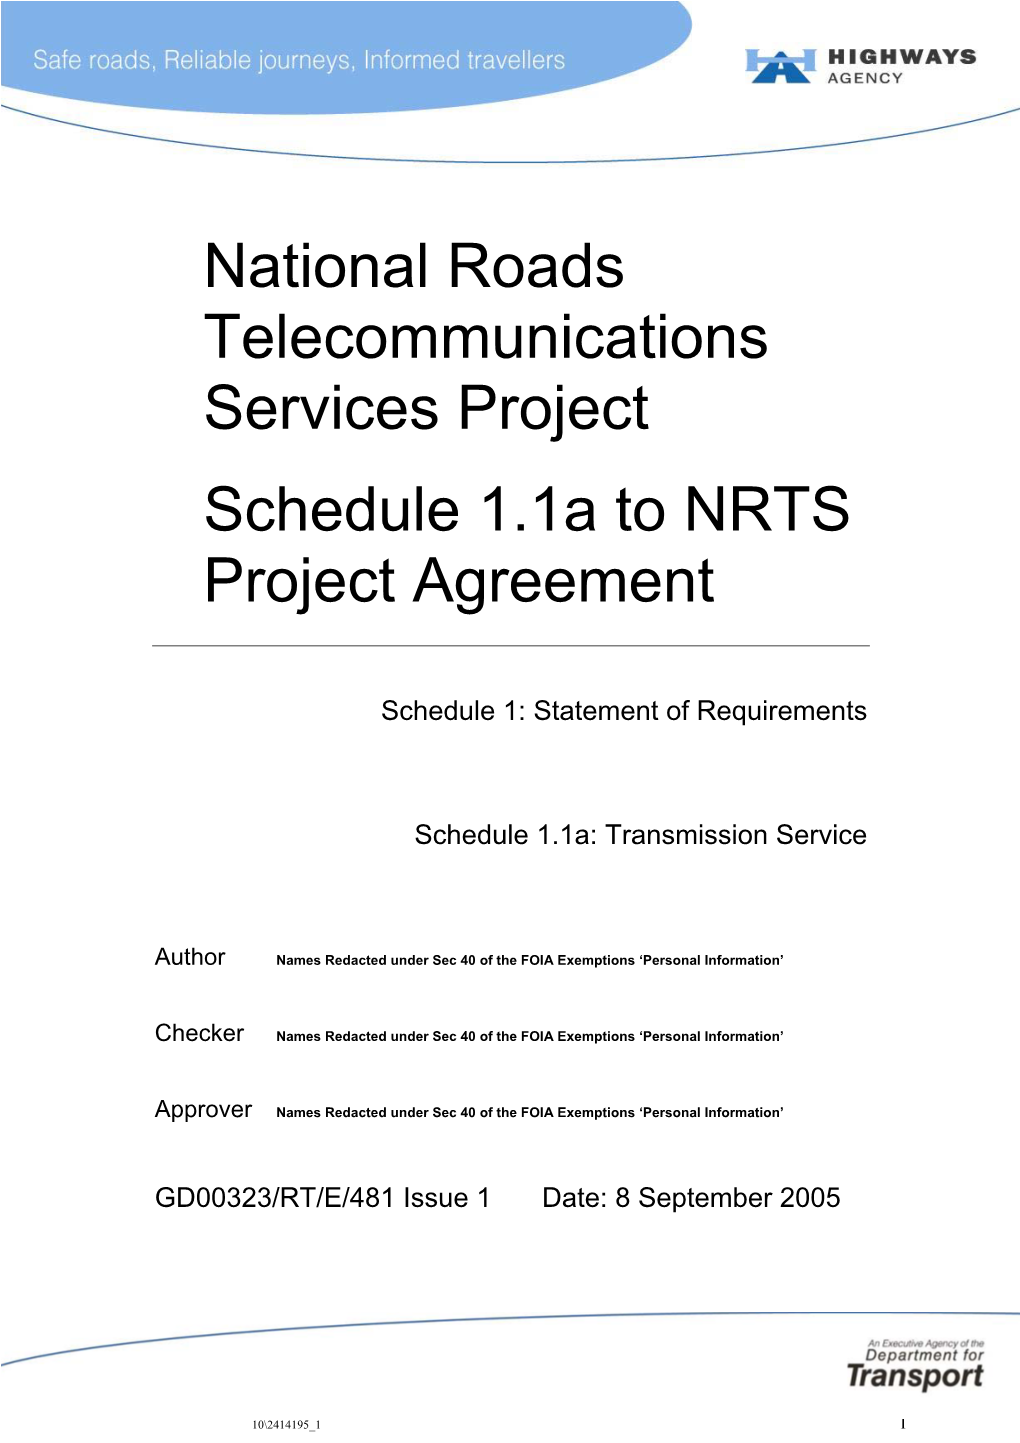 National Roads Telecommunications Services Project Schedule 1.1A to NRTS Project Agreement